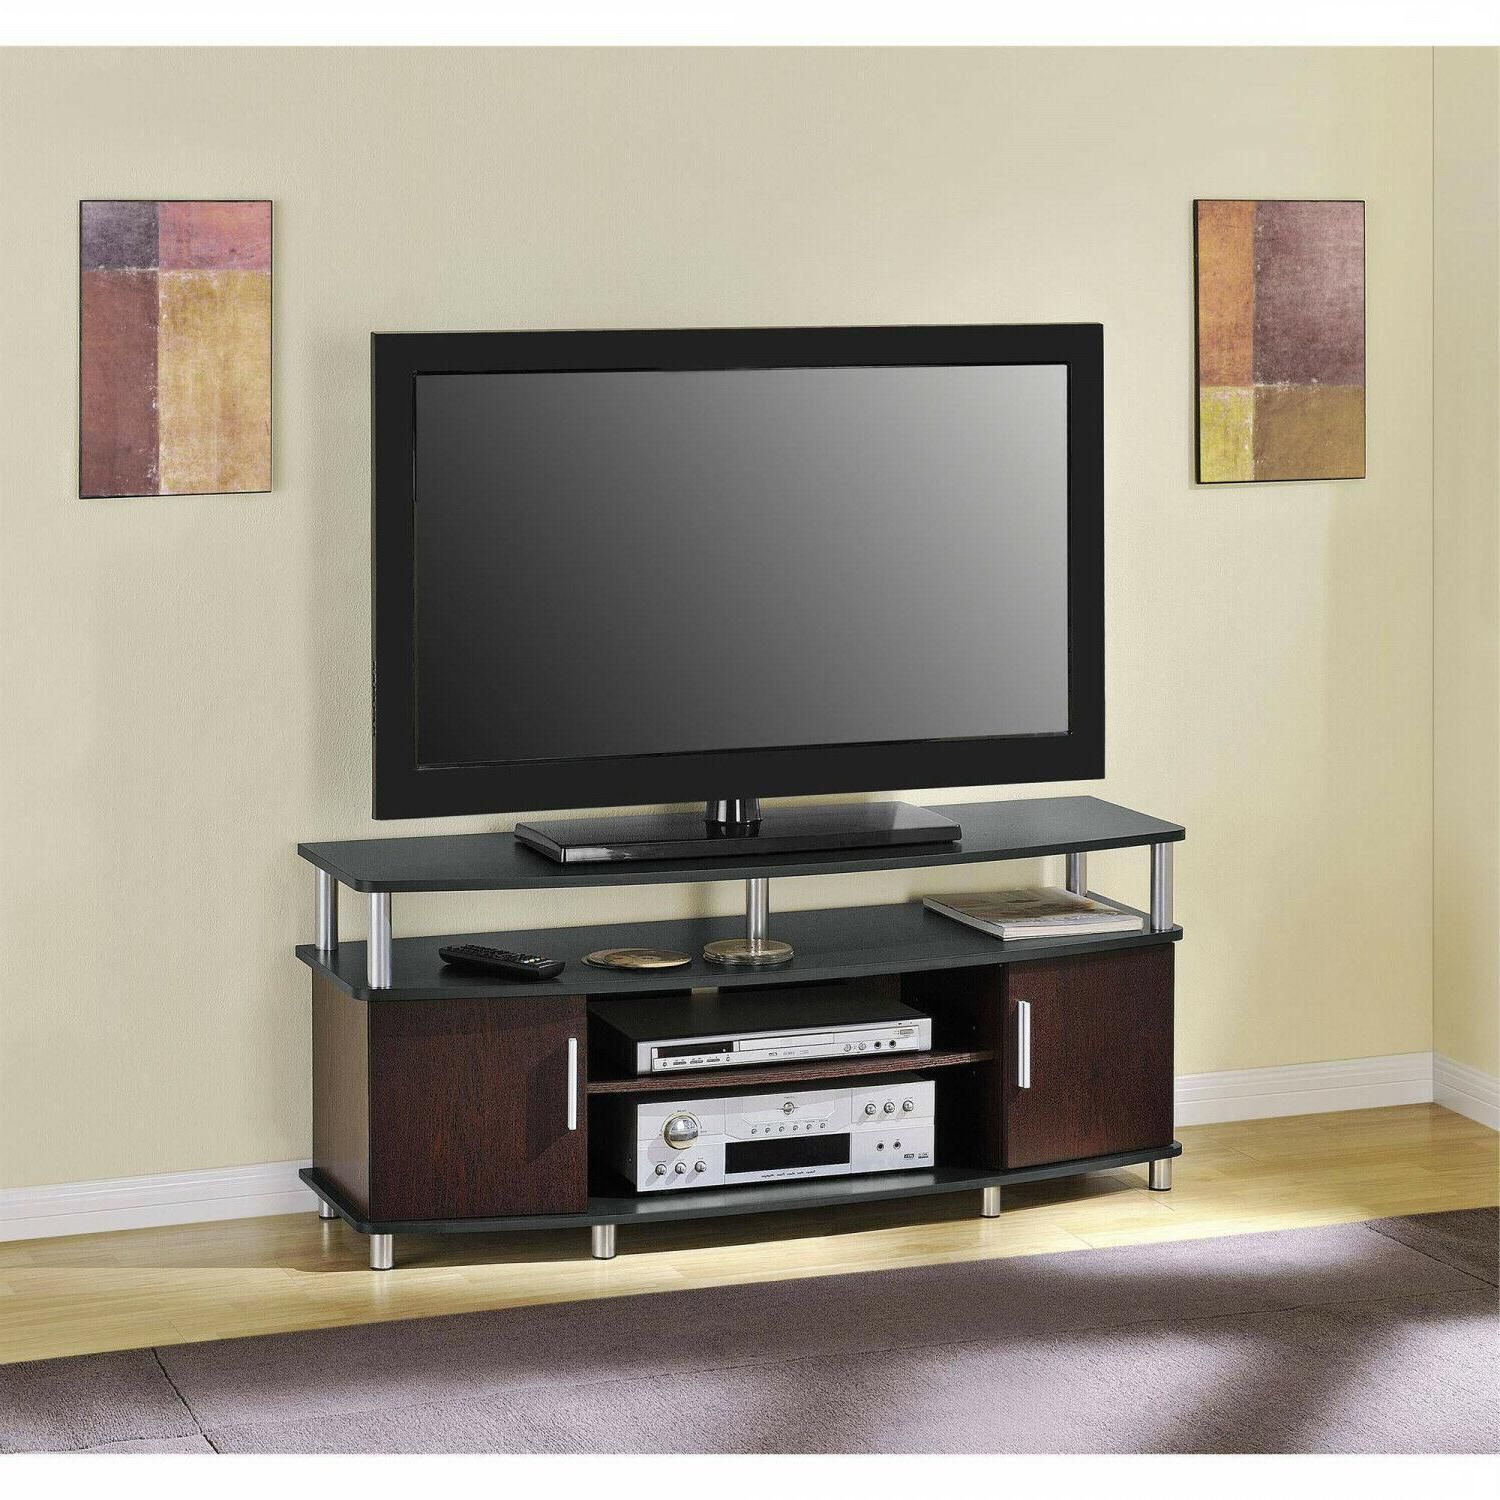 Ameriwood Home Carson Tv Stand Console Fits Pertaining To Carson Tv Stands In Black And Cherry (View 4 of 15)